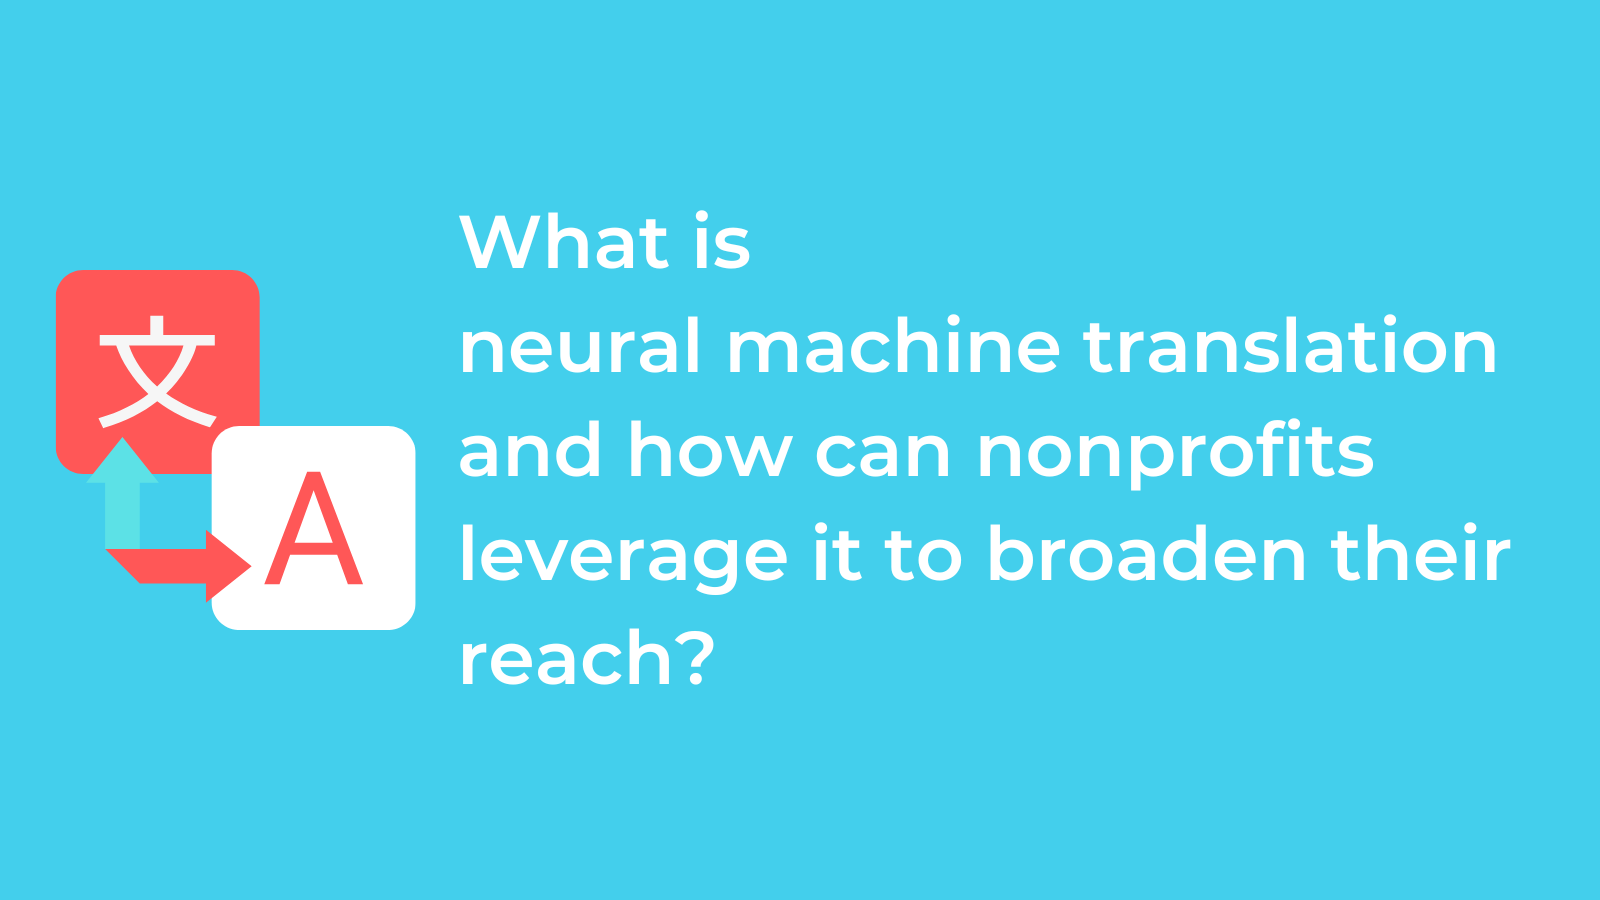 What is neural machine translation and how can nonprofits leverage it to broaden their reach